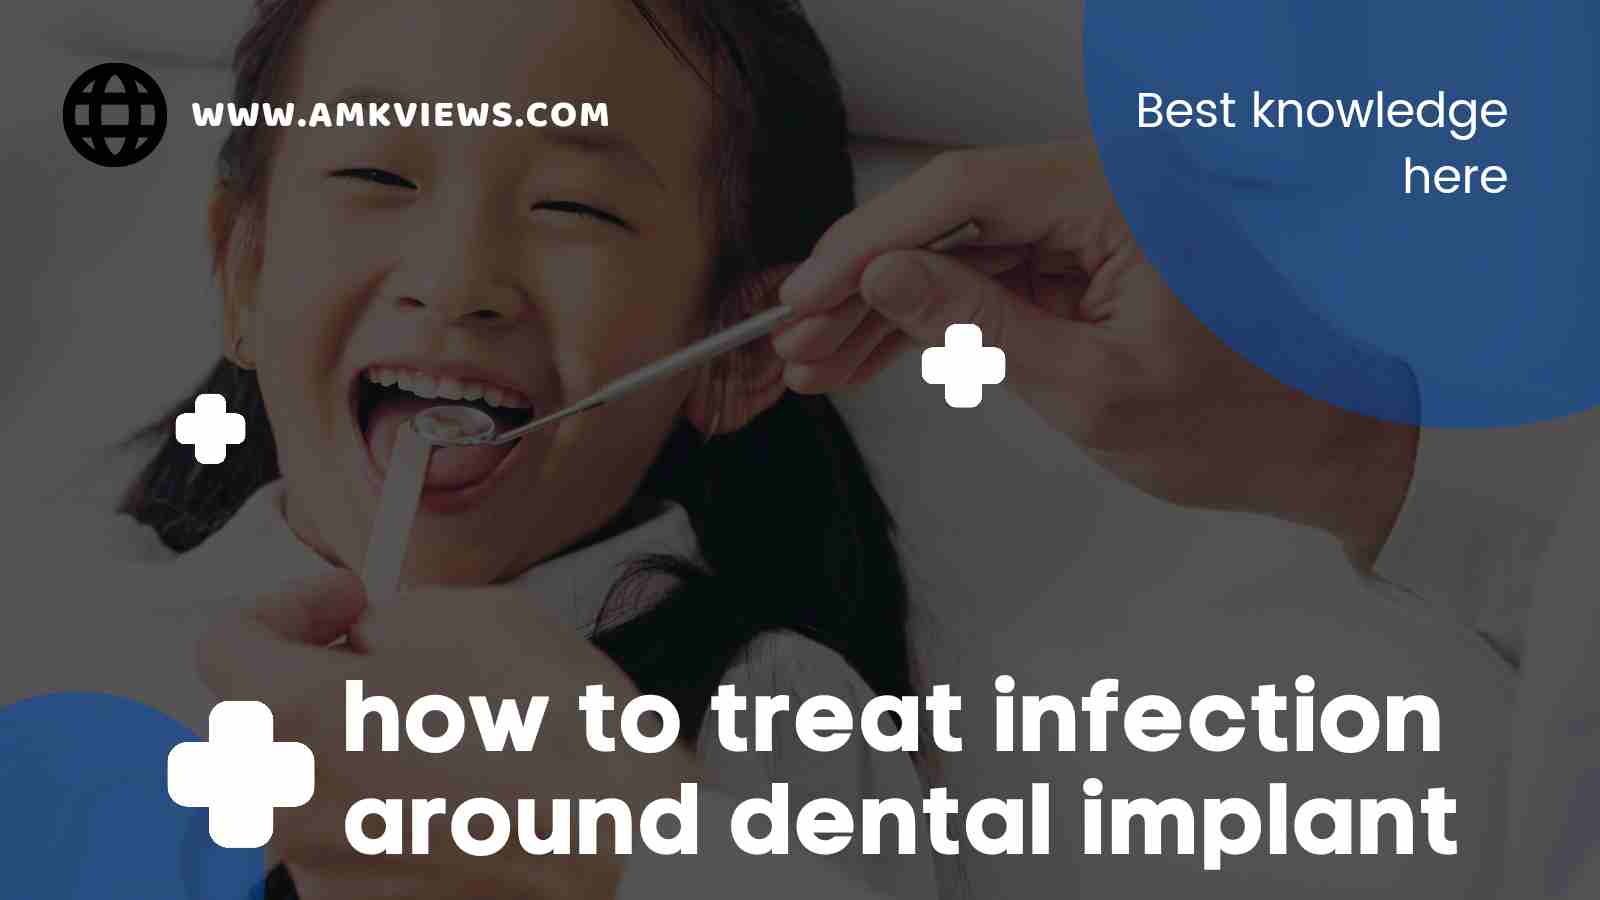 How to Treat Infection Around Dental Implants